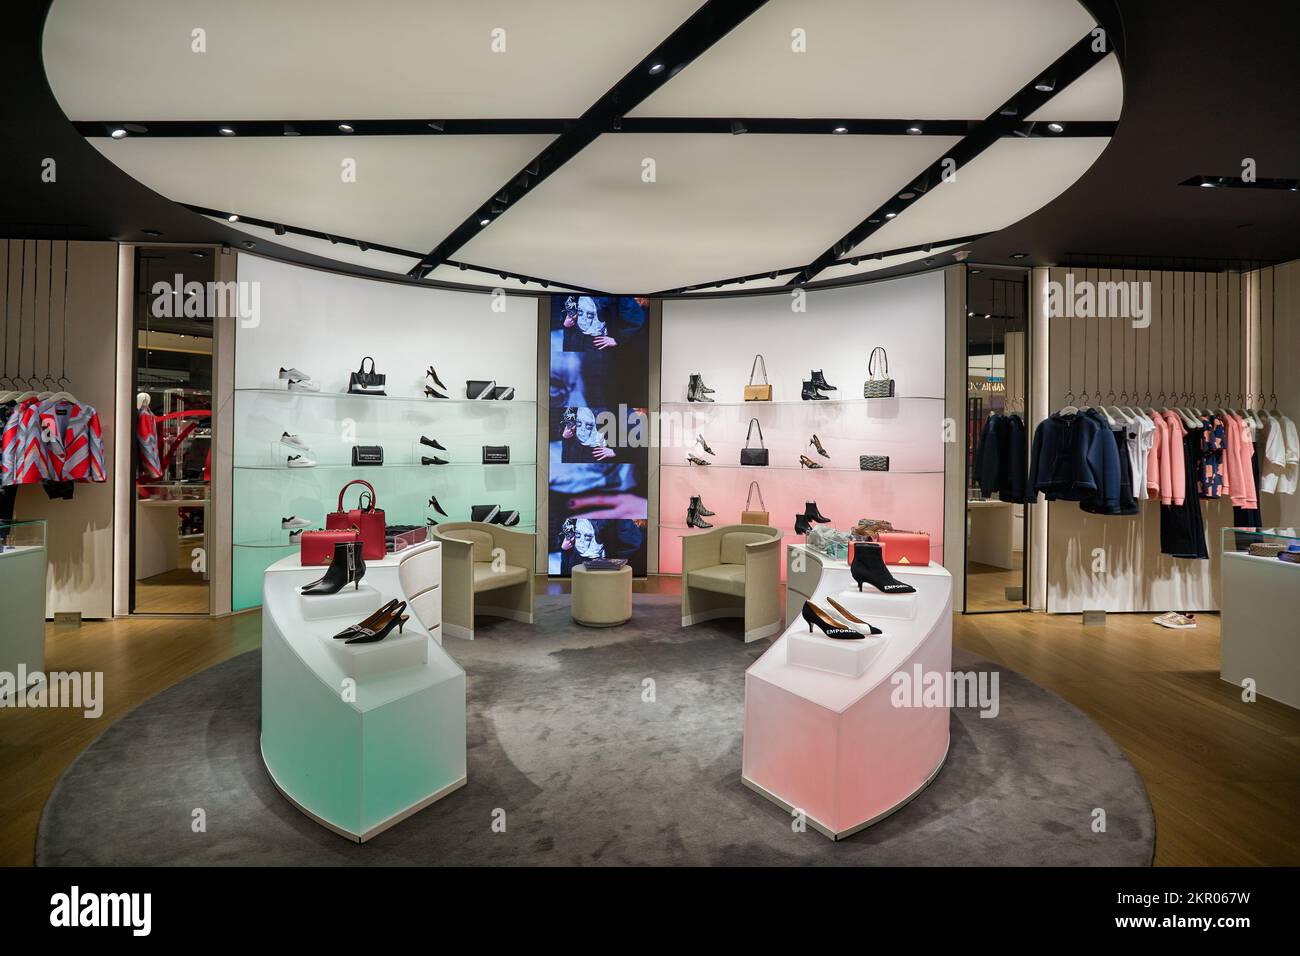 Giorgio armani outlet store in hi-res stock photography and images - Alamy